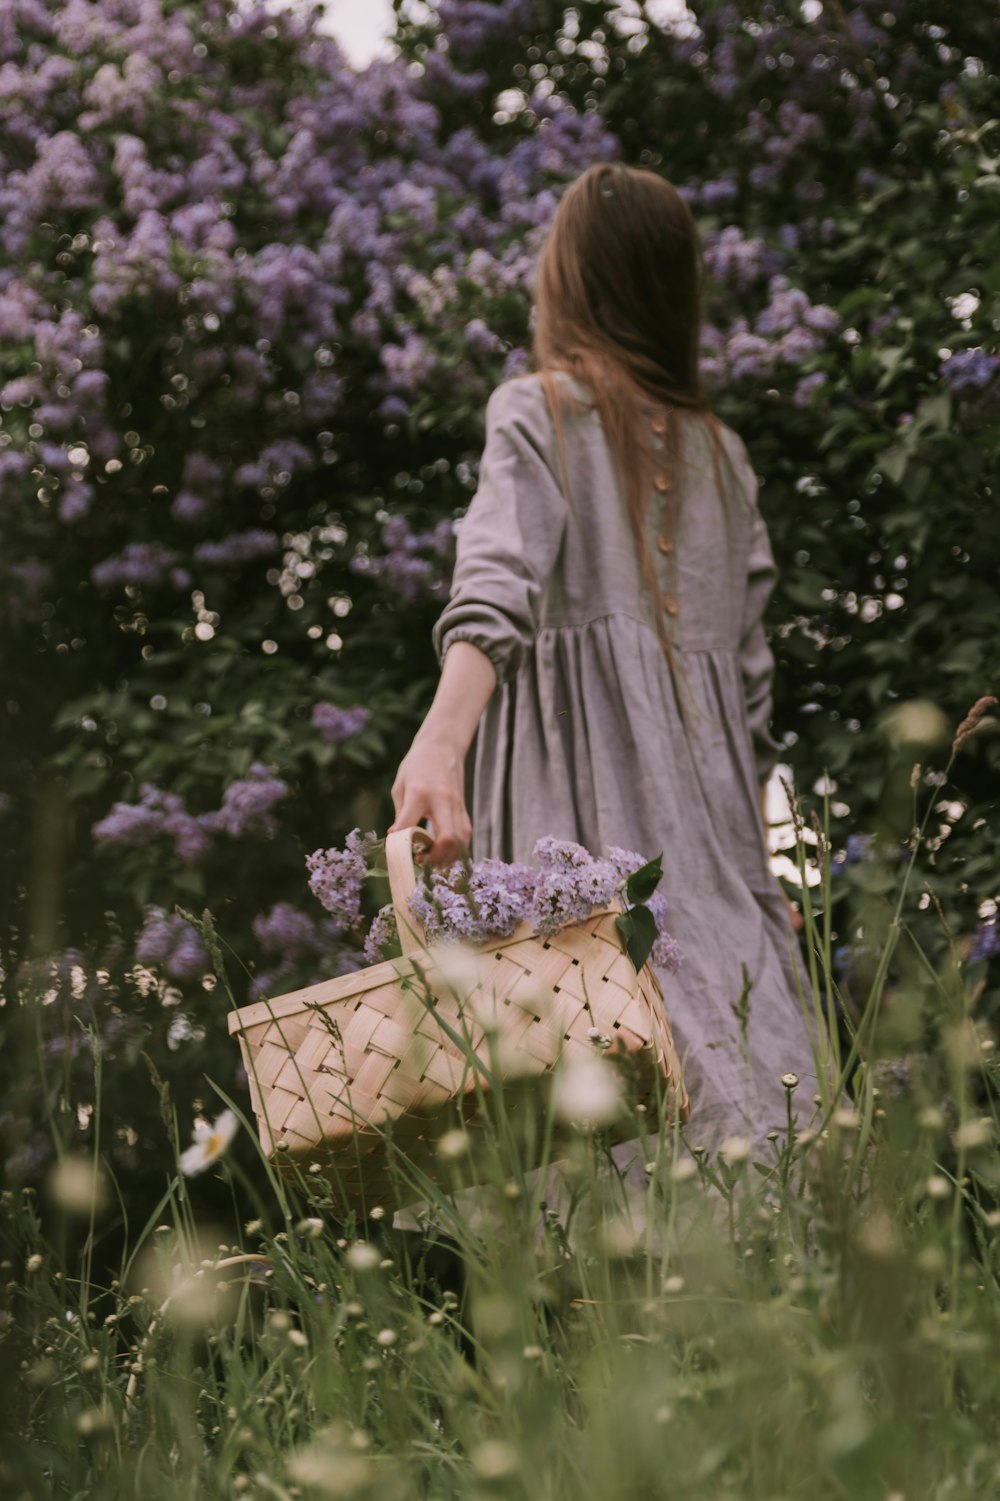 a woman holding a basket in a field of flowers